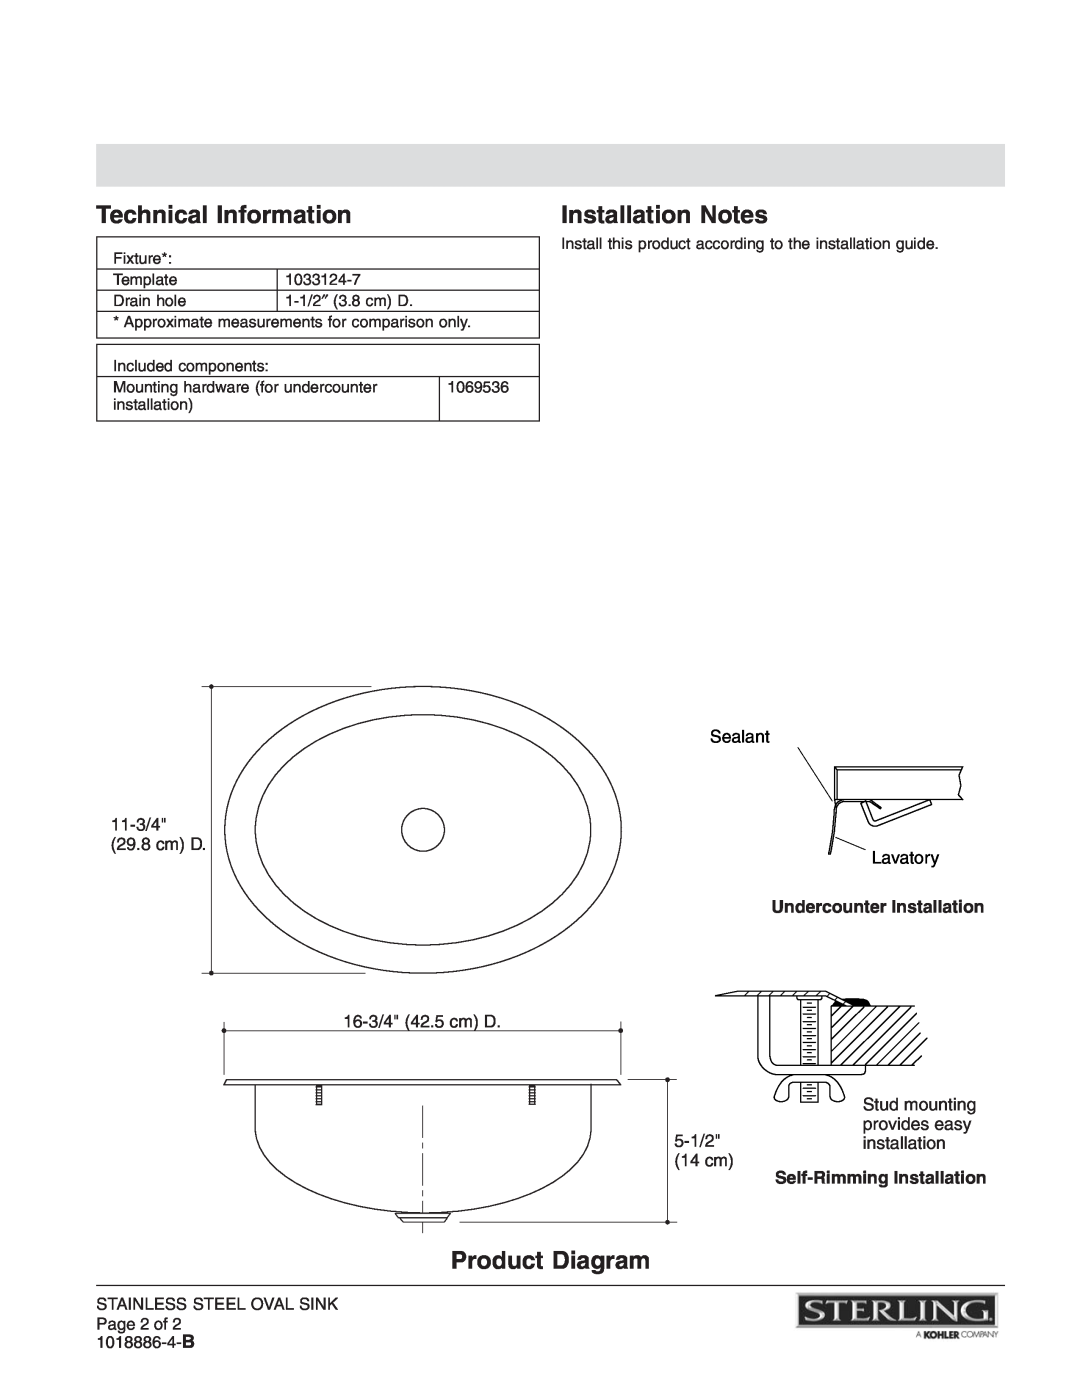 Sterling Plumbing S1201-0 Technical Information, Installation Notes, Product Diagram, Sealant Lavatory 